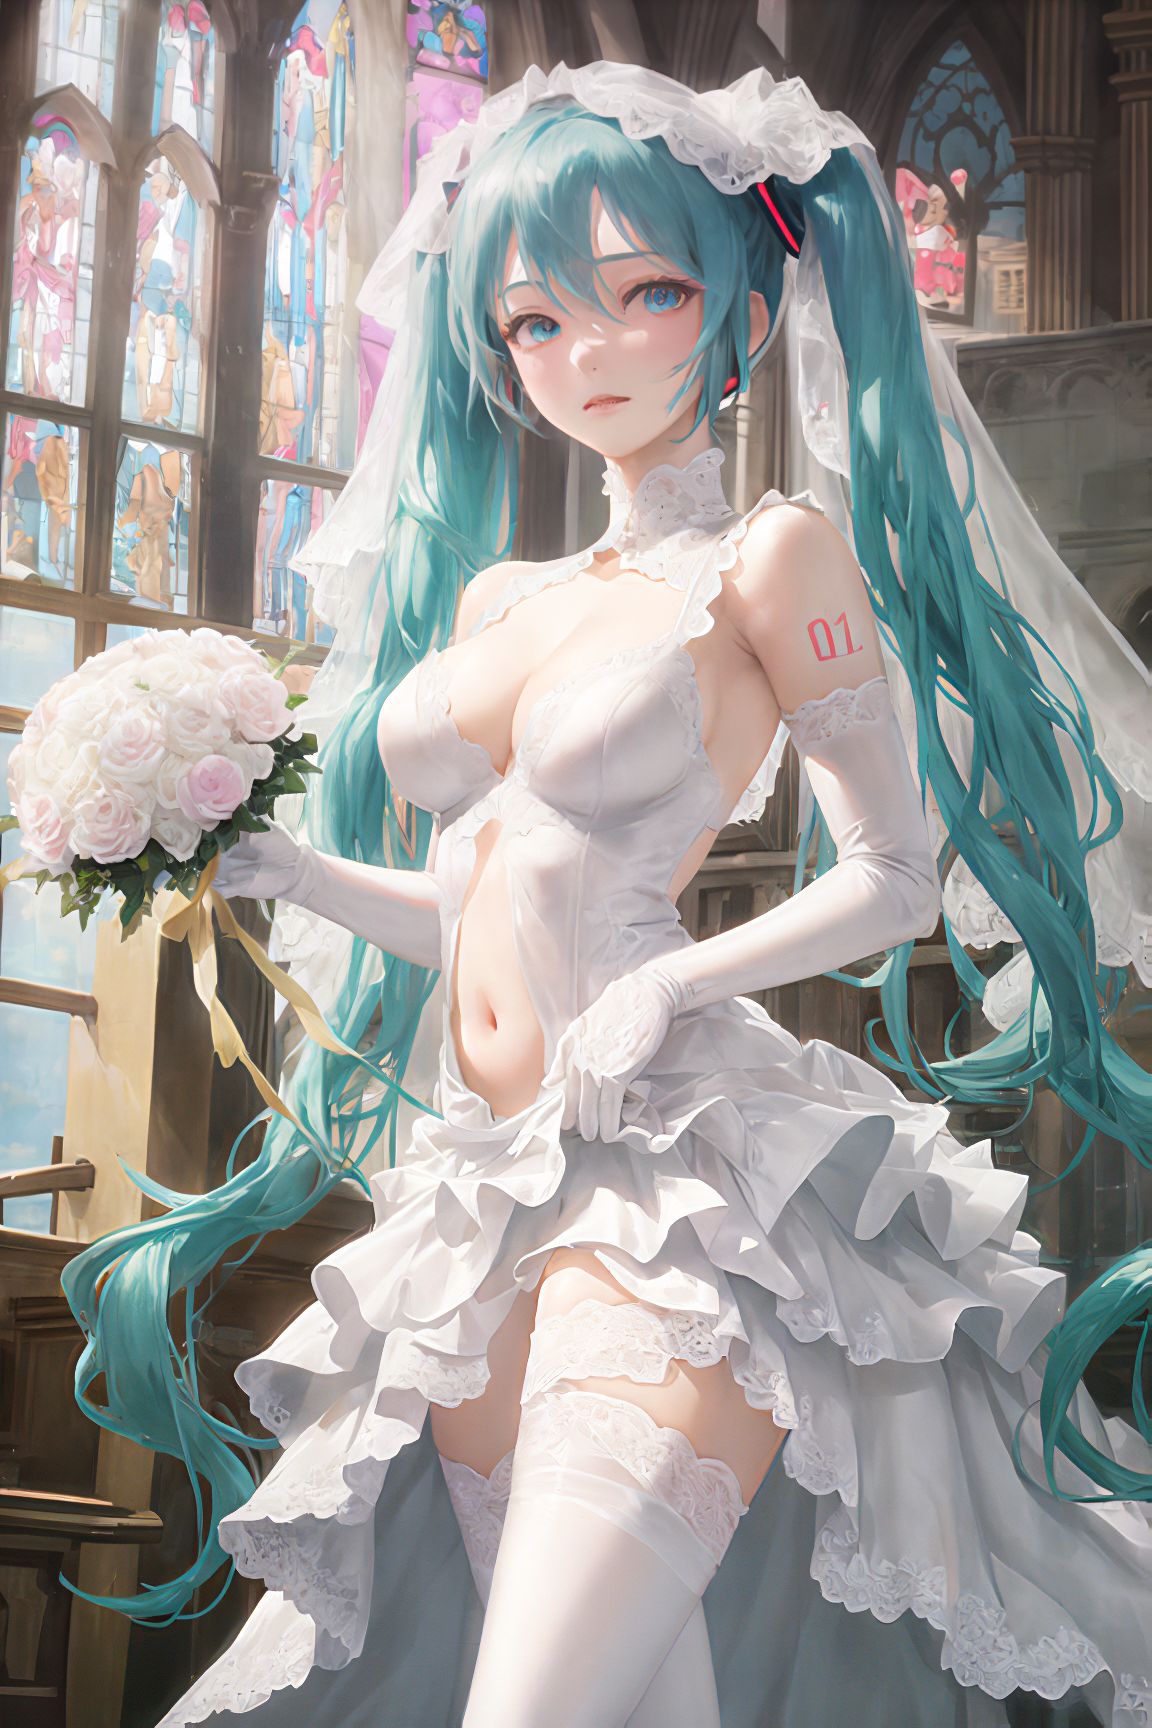 Anime 1152x1728 anime anime girls flowers long hair wedding dress blue eyes Hatsune Miku belly button twintails white clothing white stockings portrait display Vocaloid dress lifting dress elbow gloves stained glass big boobs AI art